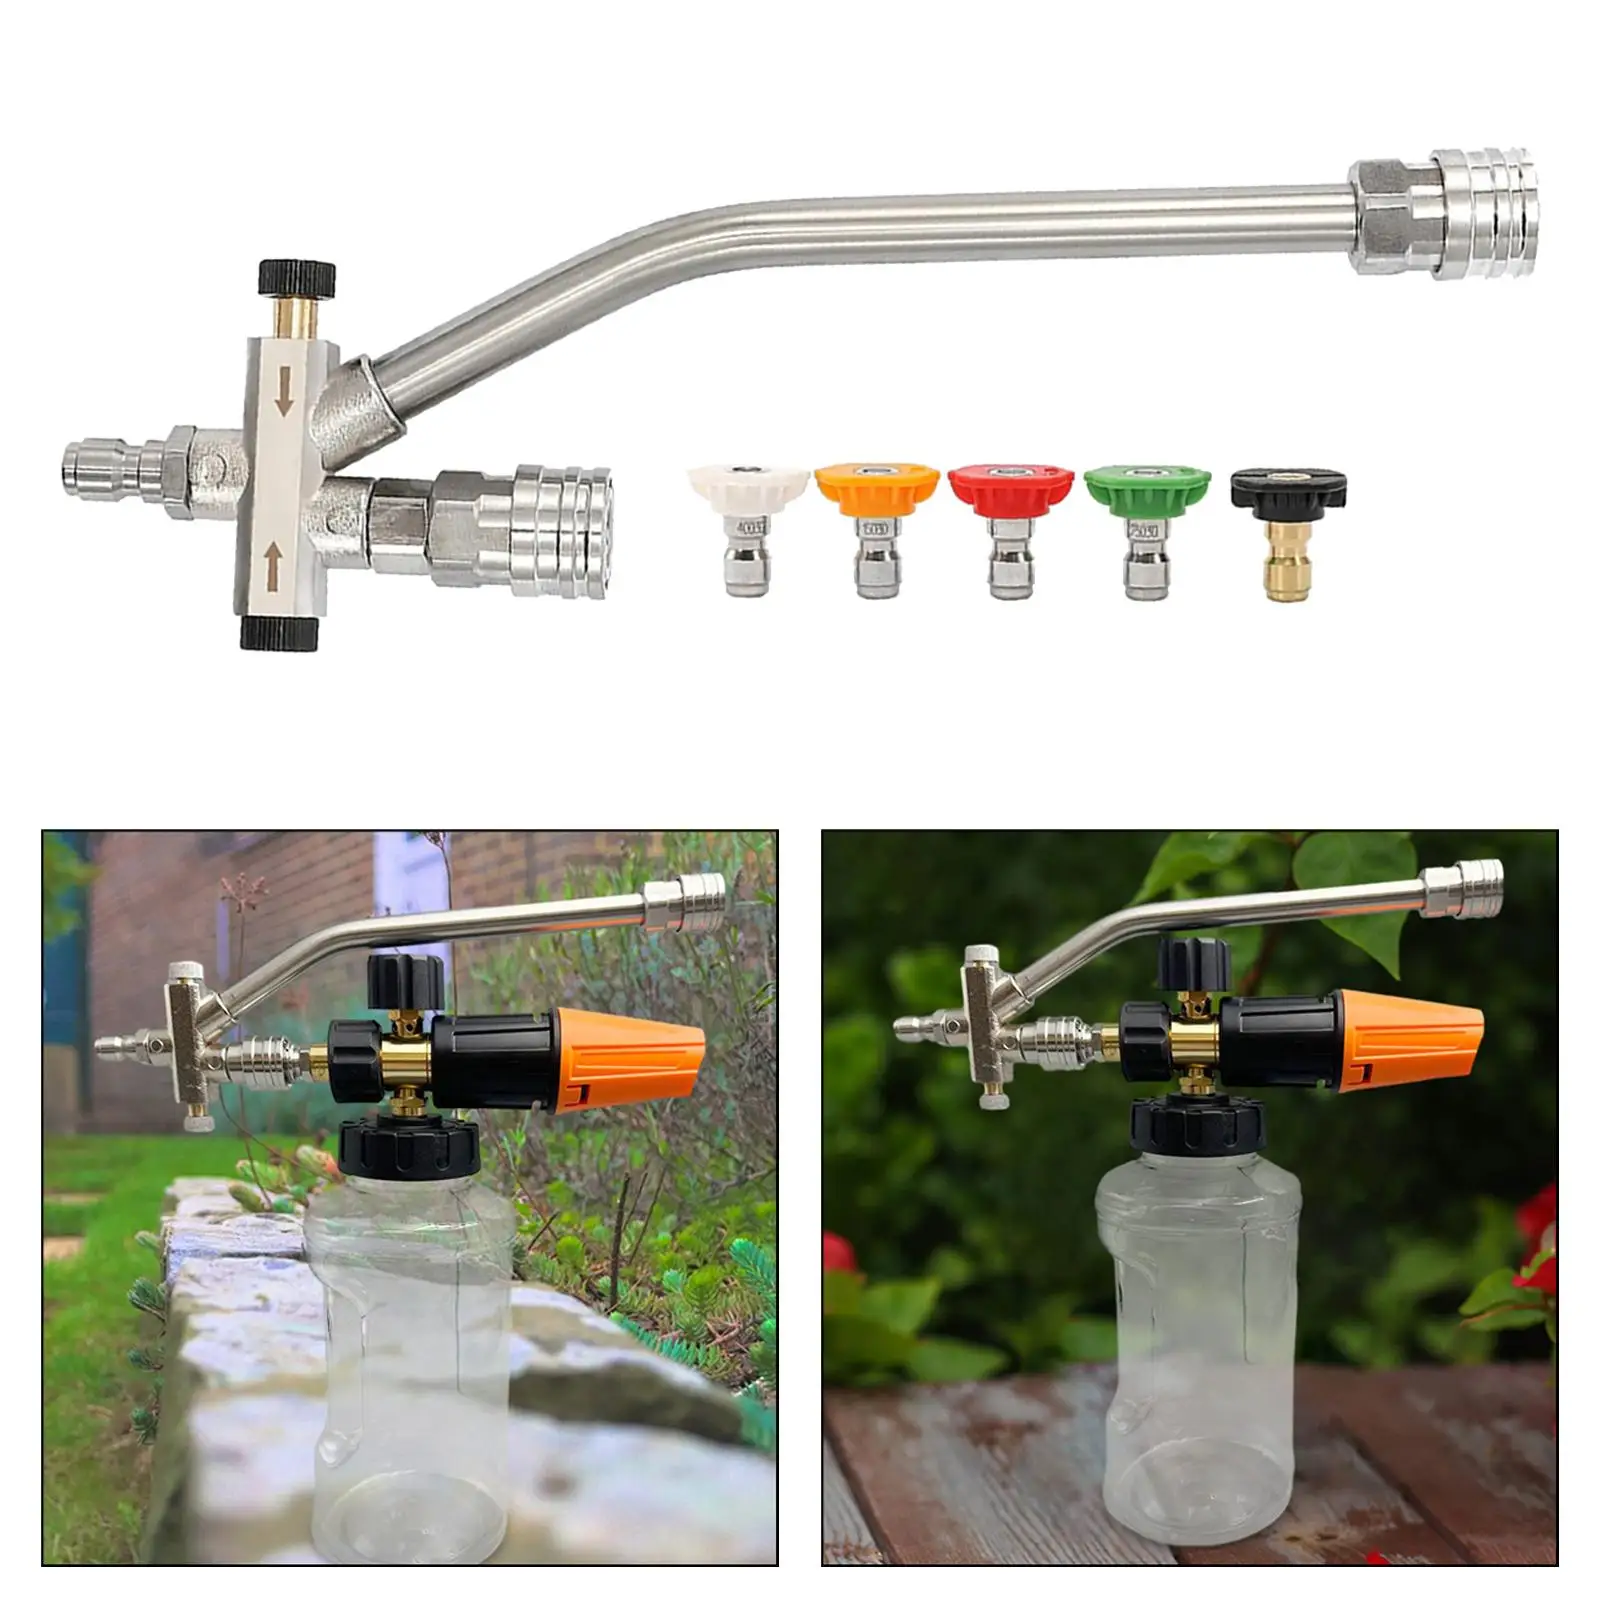 Dual Connector Accessory for Washing Cars Cleaning Driveways Lawns Care